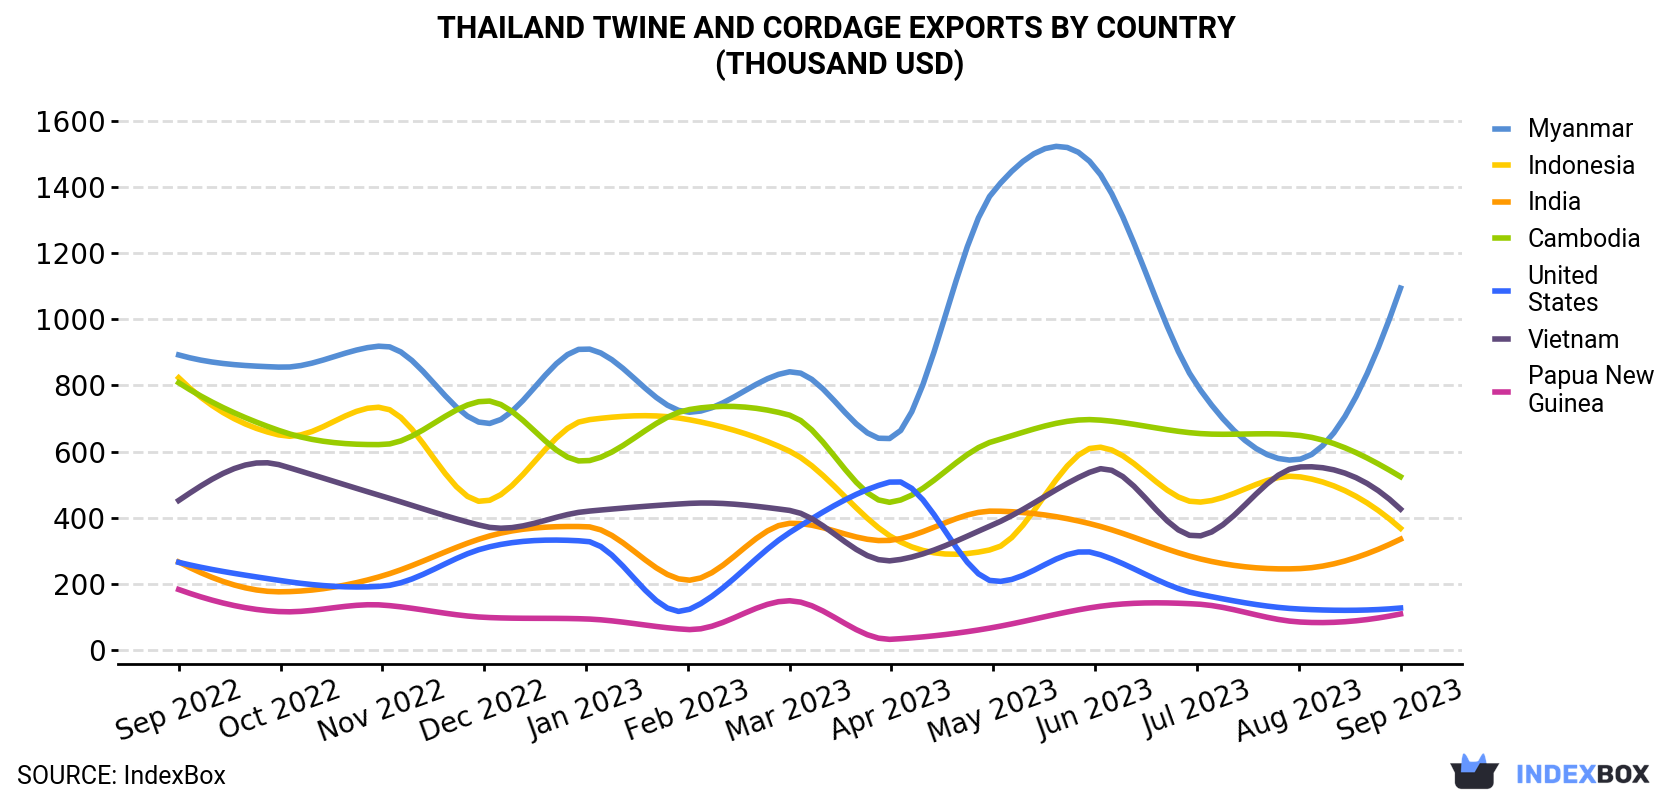 Thailand Twine And Cordage Exports By Country (Thousand USD)